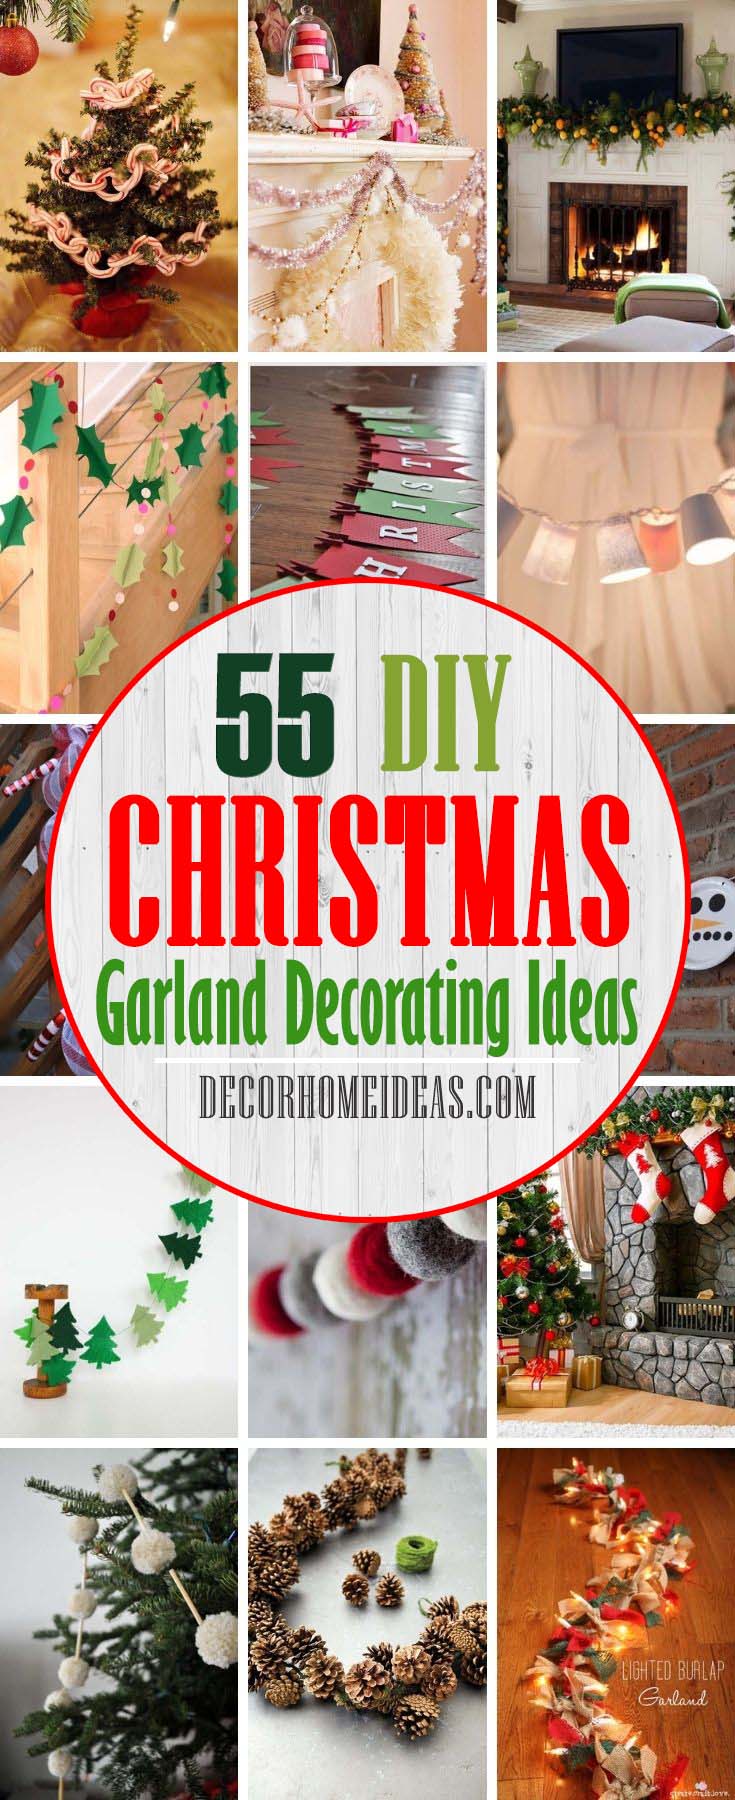 Best DIY Christmas Garland Decorating Ideas. Garland may be one of the most quintessential Christmas decorations you can have in your home during the holiday season, not counting your tree, of course. You may want to DIY your own to match your other decor, or opt for a more classic store-bought look. #decorhomeideas